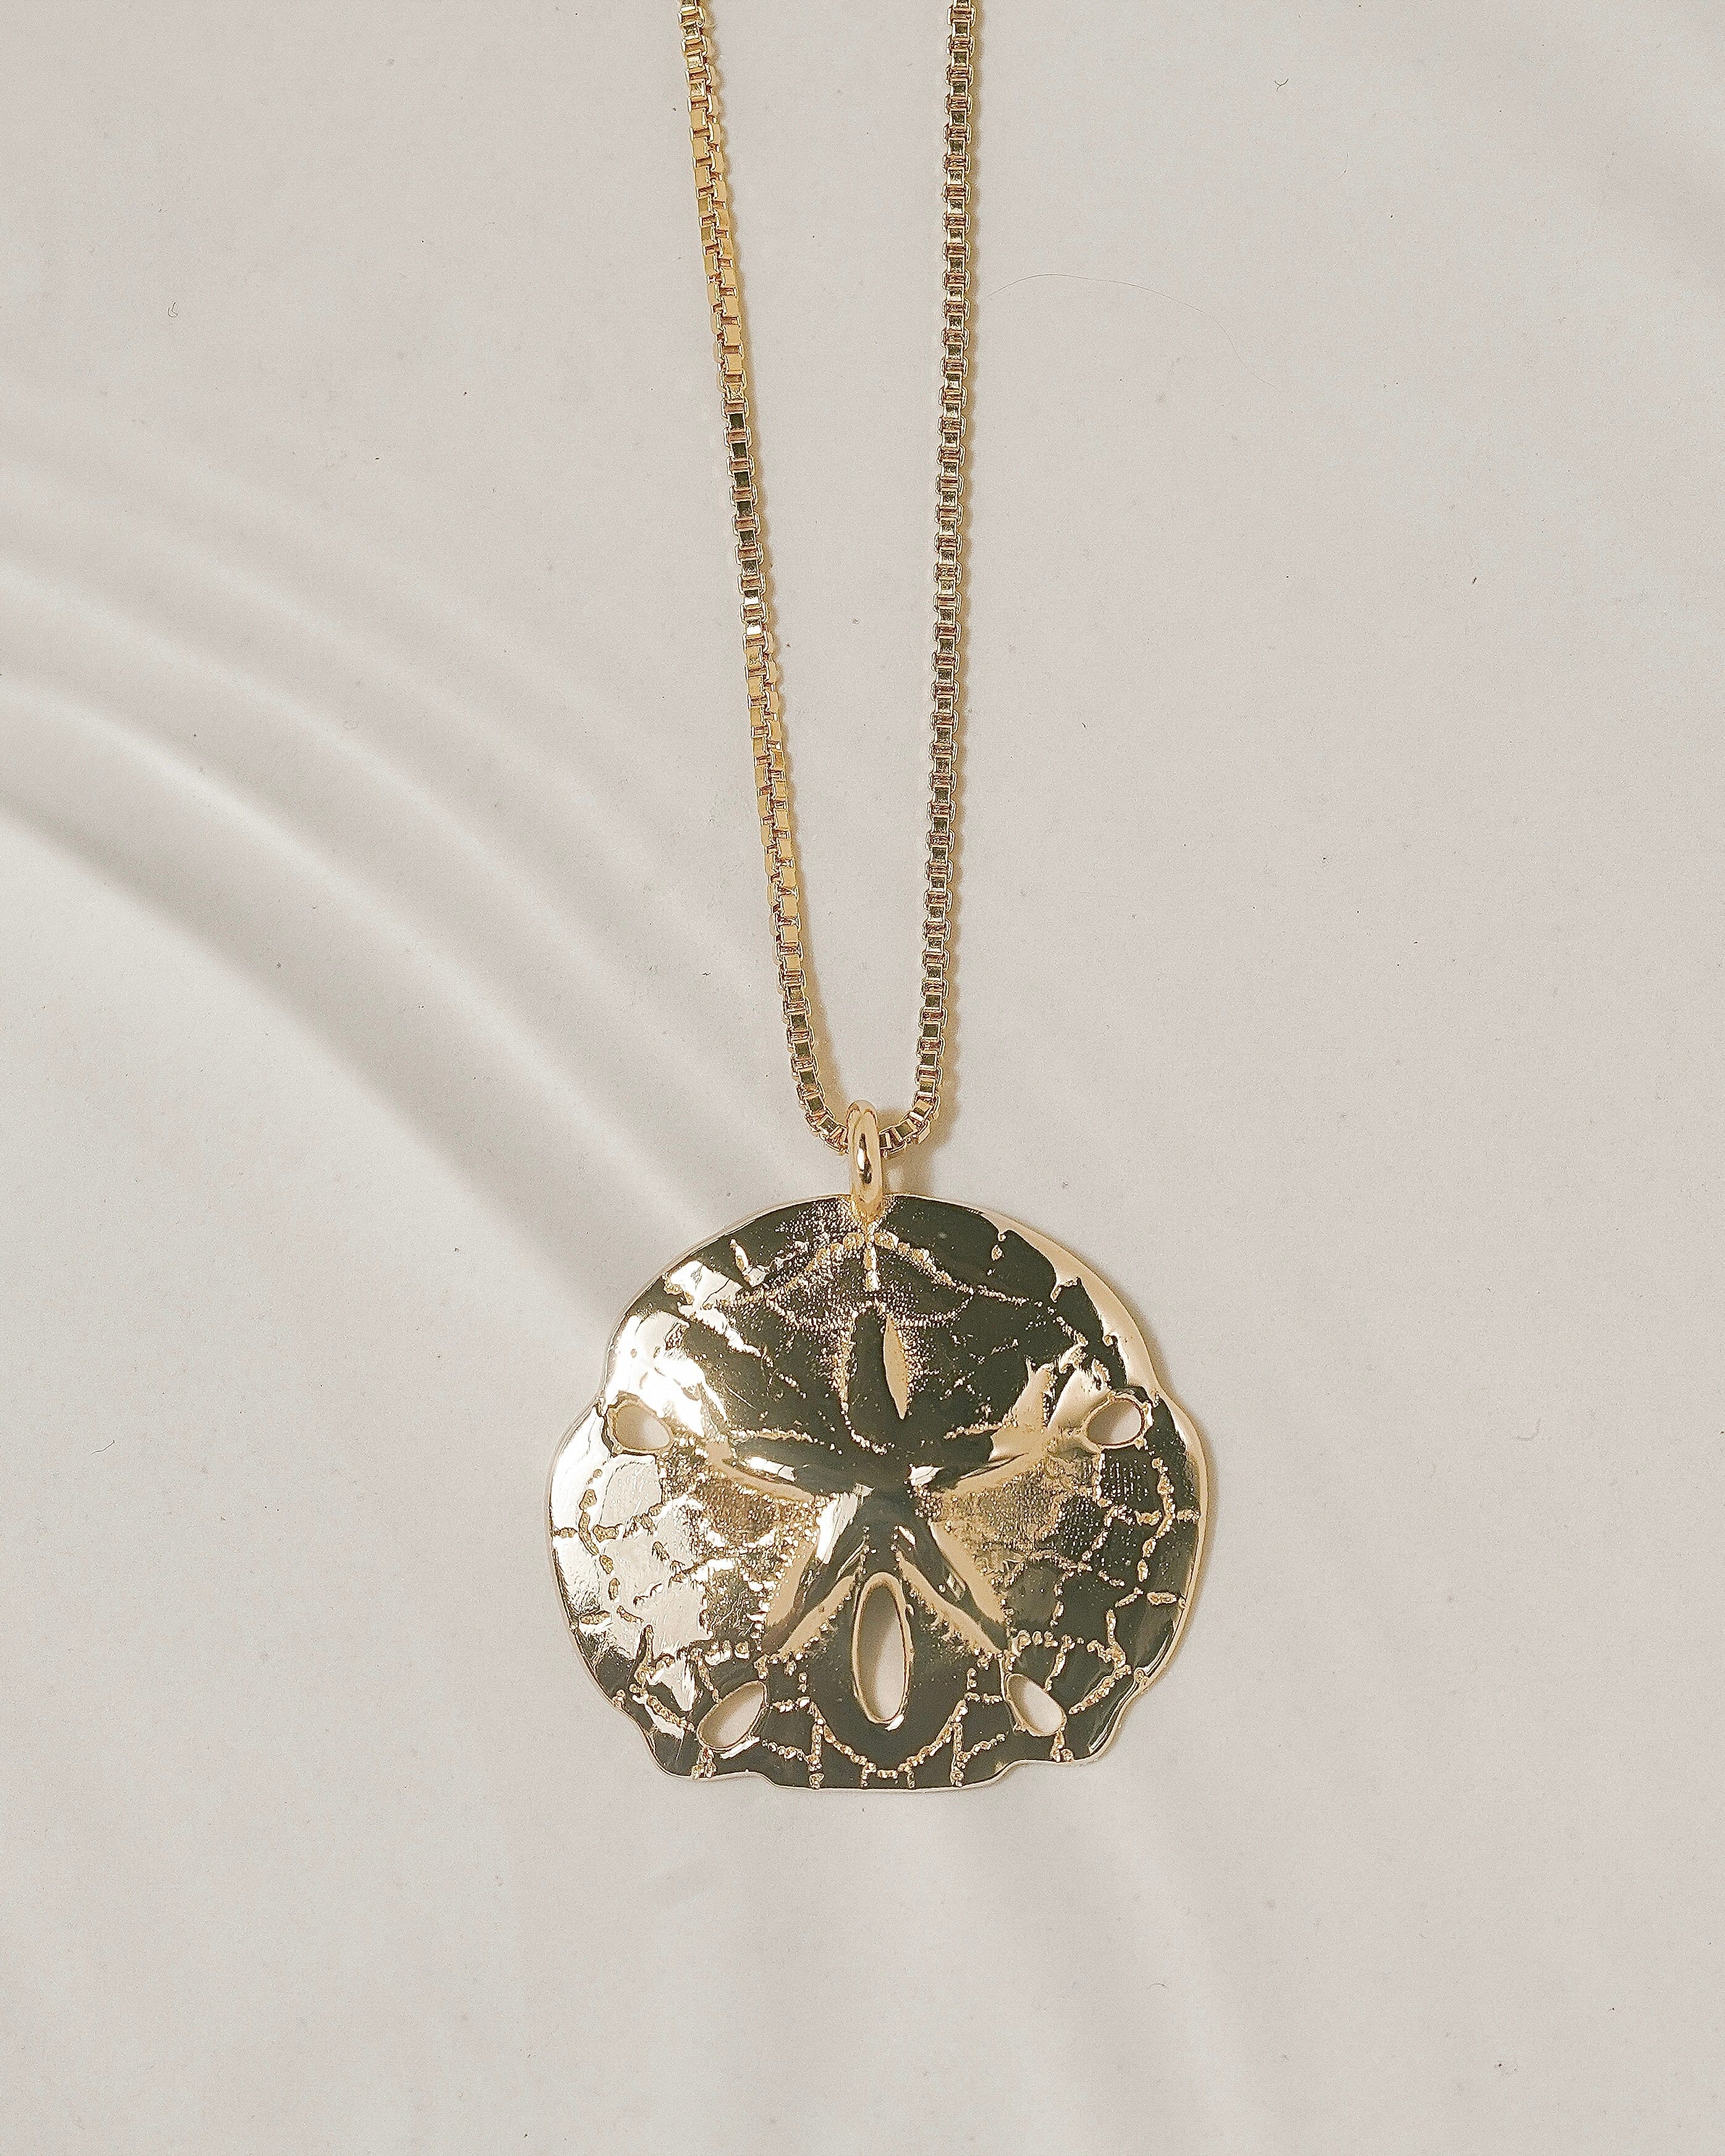 Buy 14k Solid Gold Sand Dollar Pendant on 18 Solid Gold Chain. Online in  India - Etsy